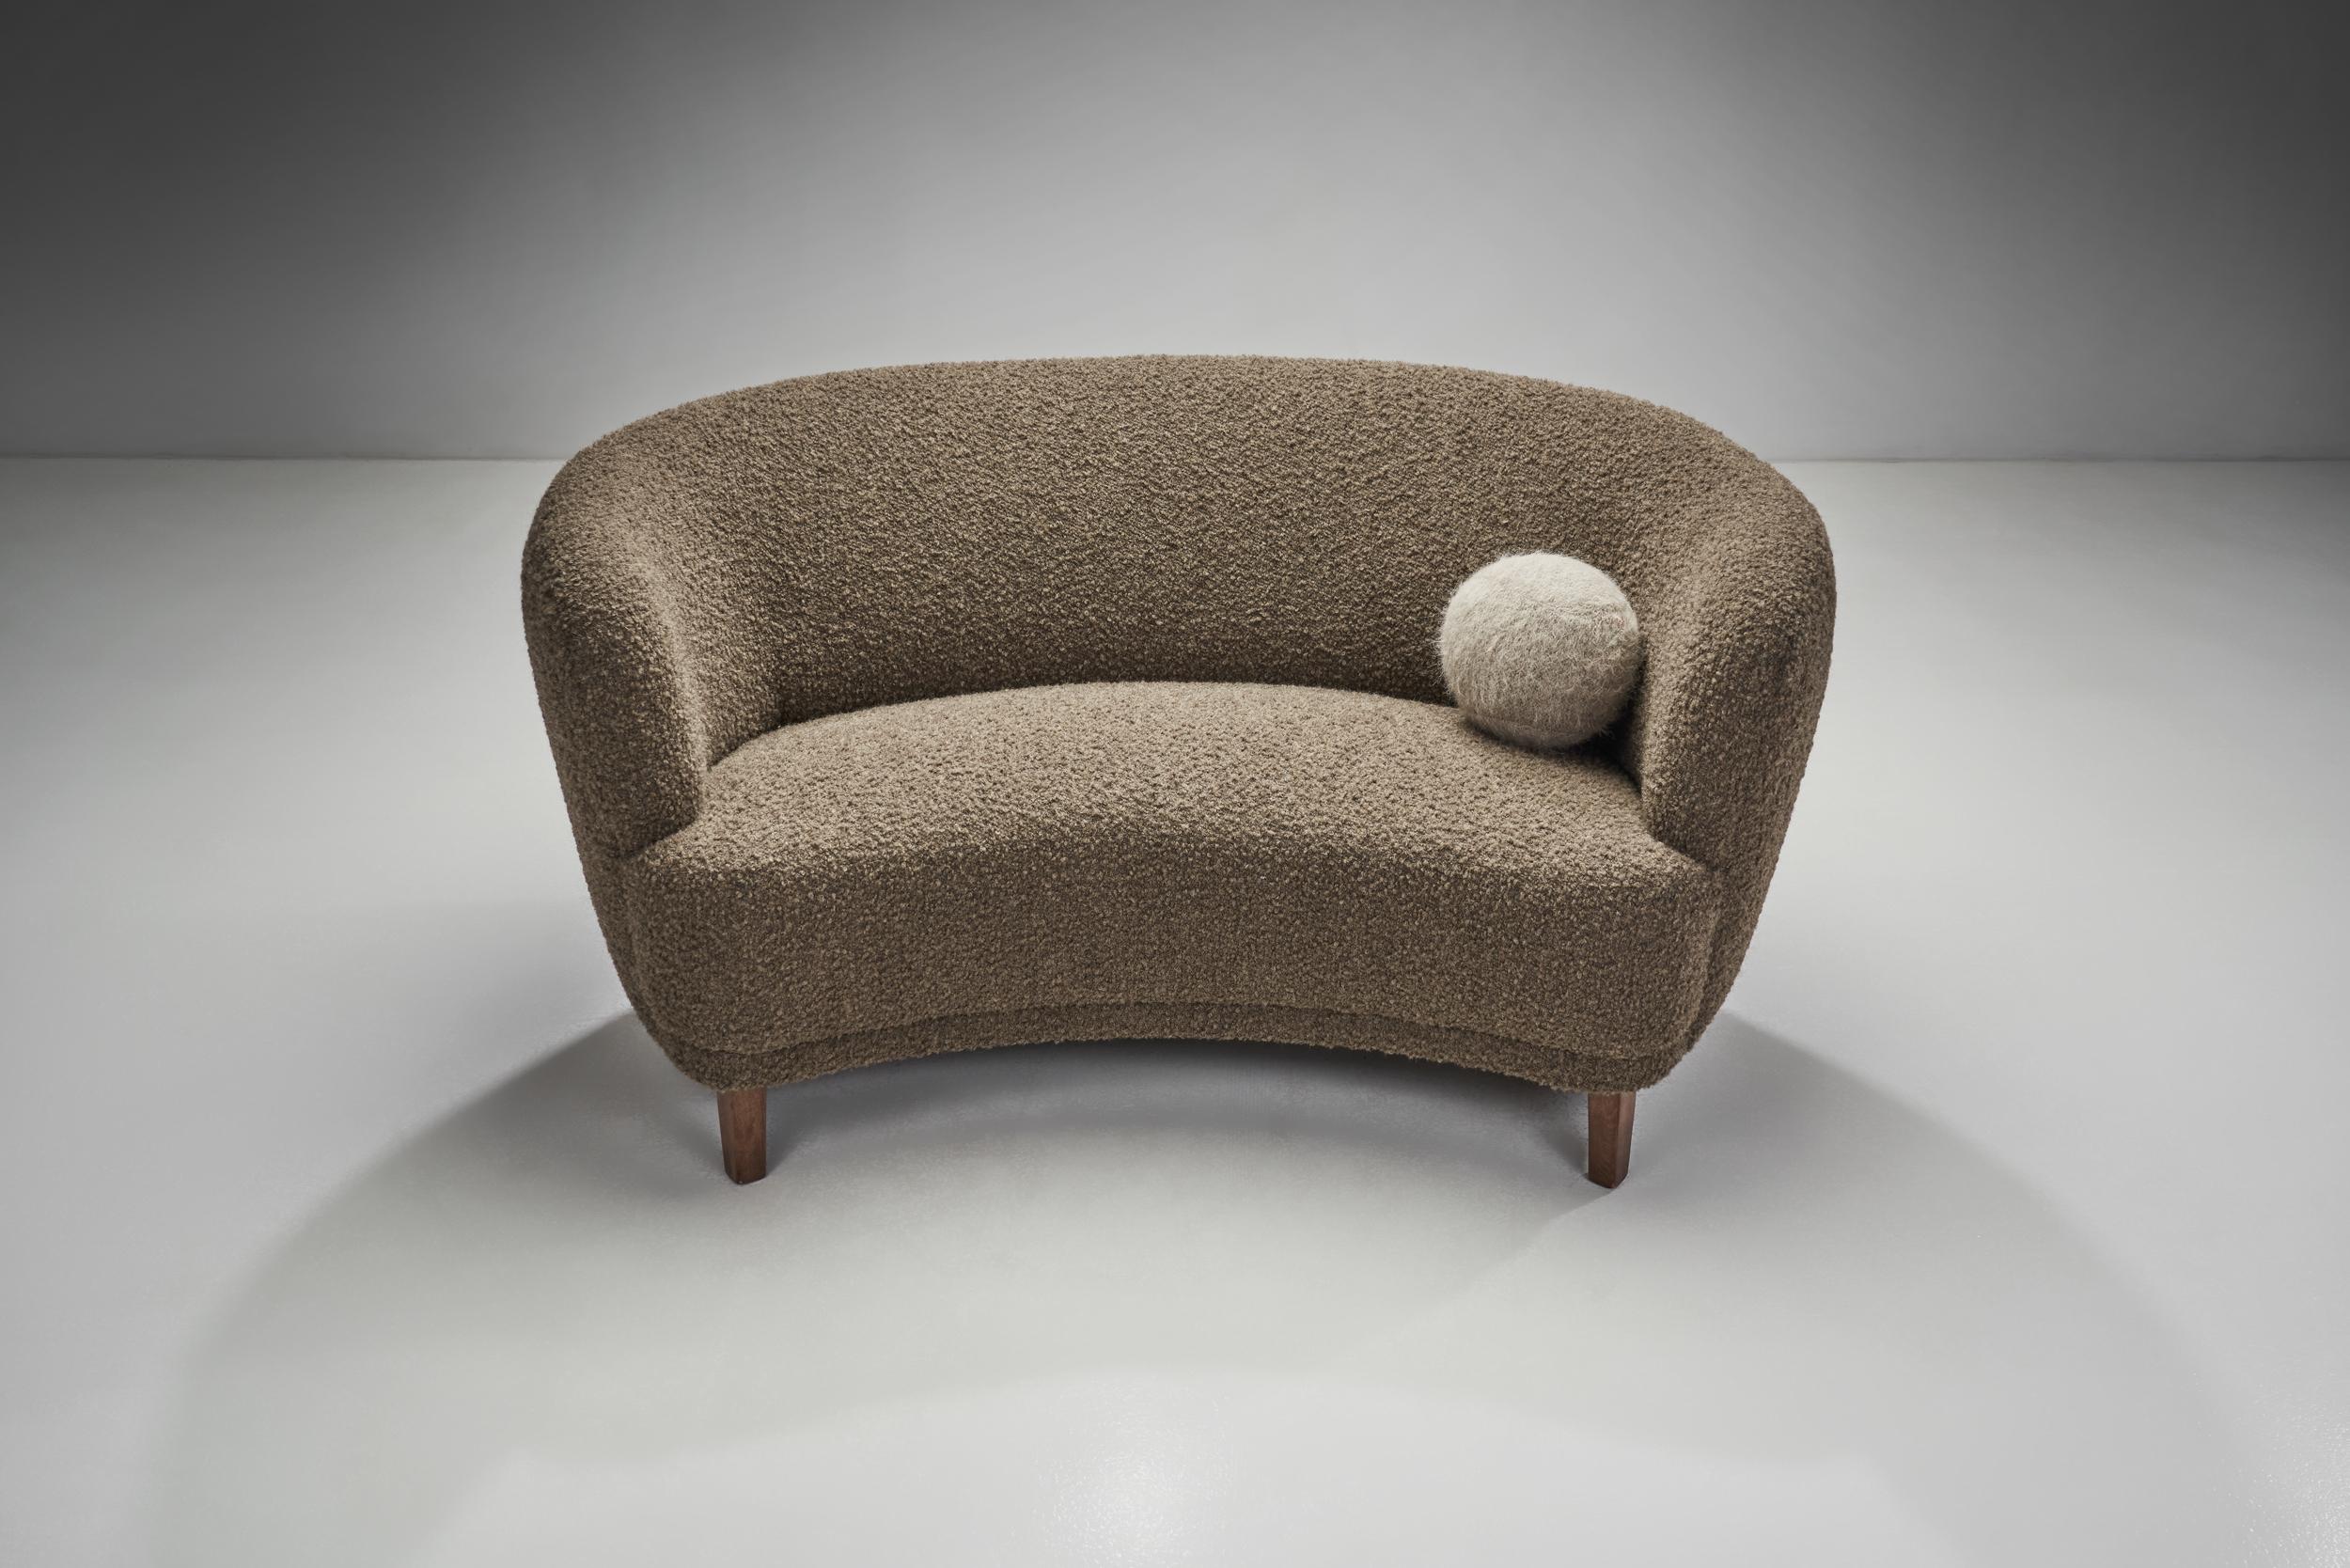 Fabric Mid-Century Modern Two-Seater Sofa by a Danish Cabinetmaker, Denmark, 1940s